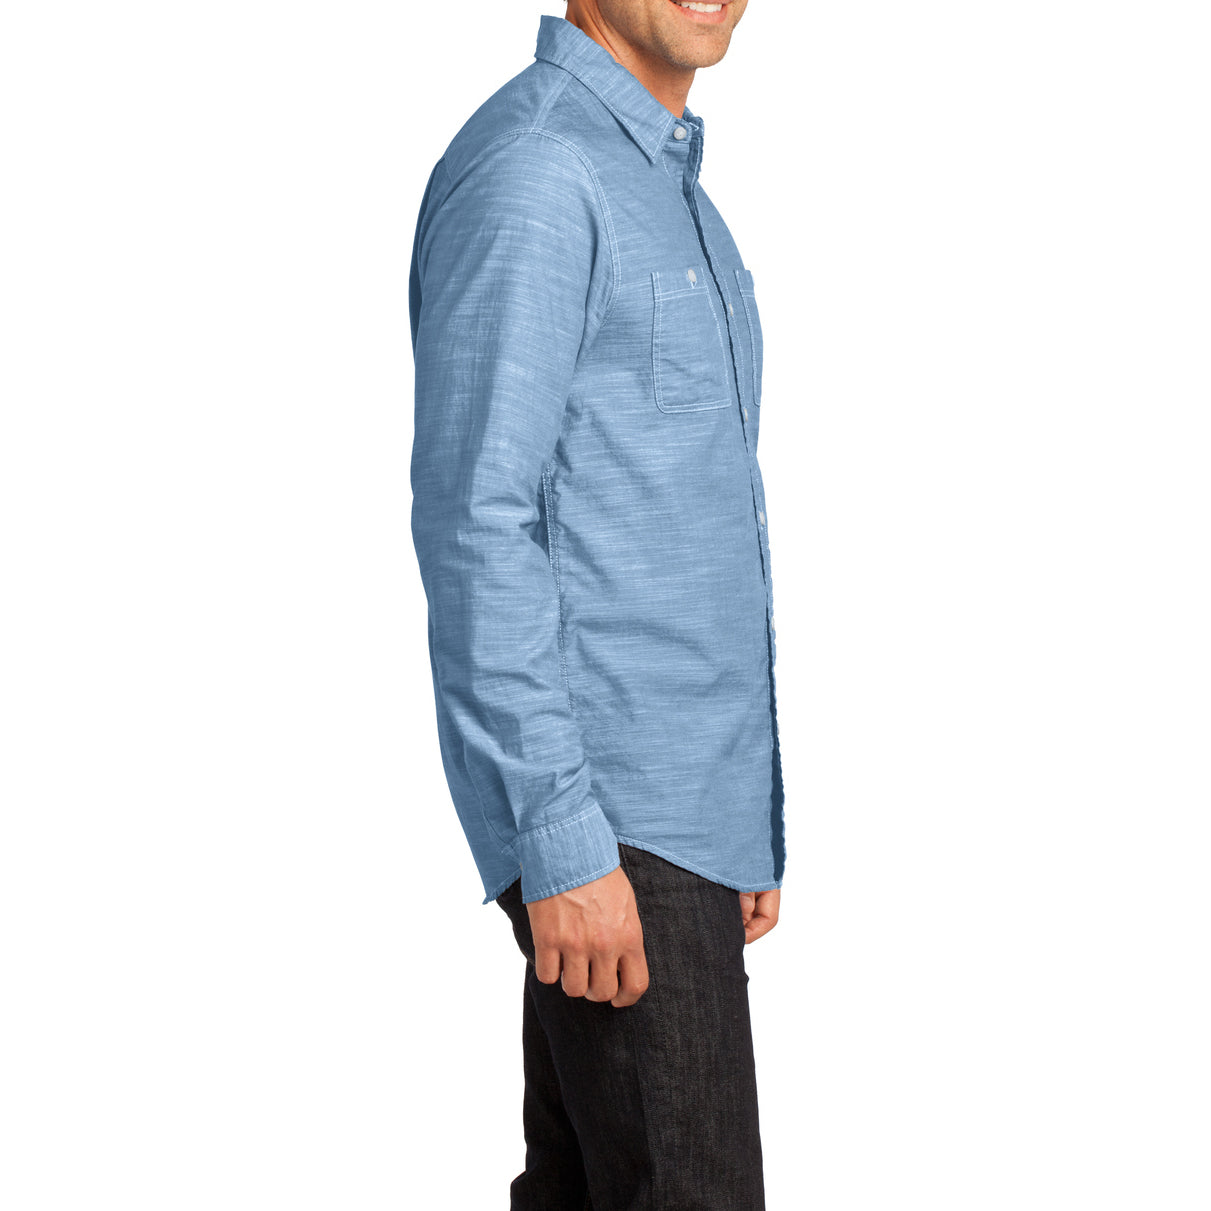 Mens Long Sleeve Washed Woven Shirt - Light Blue - Side